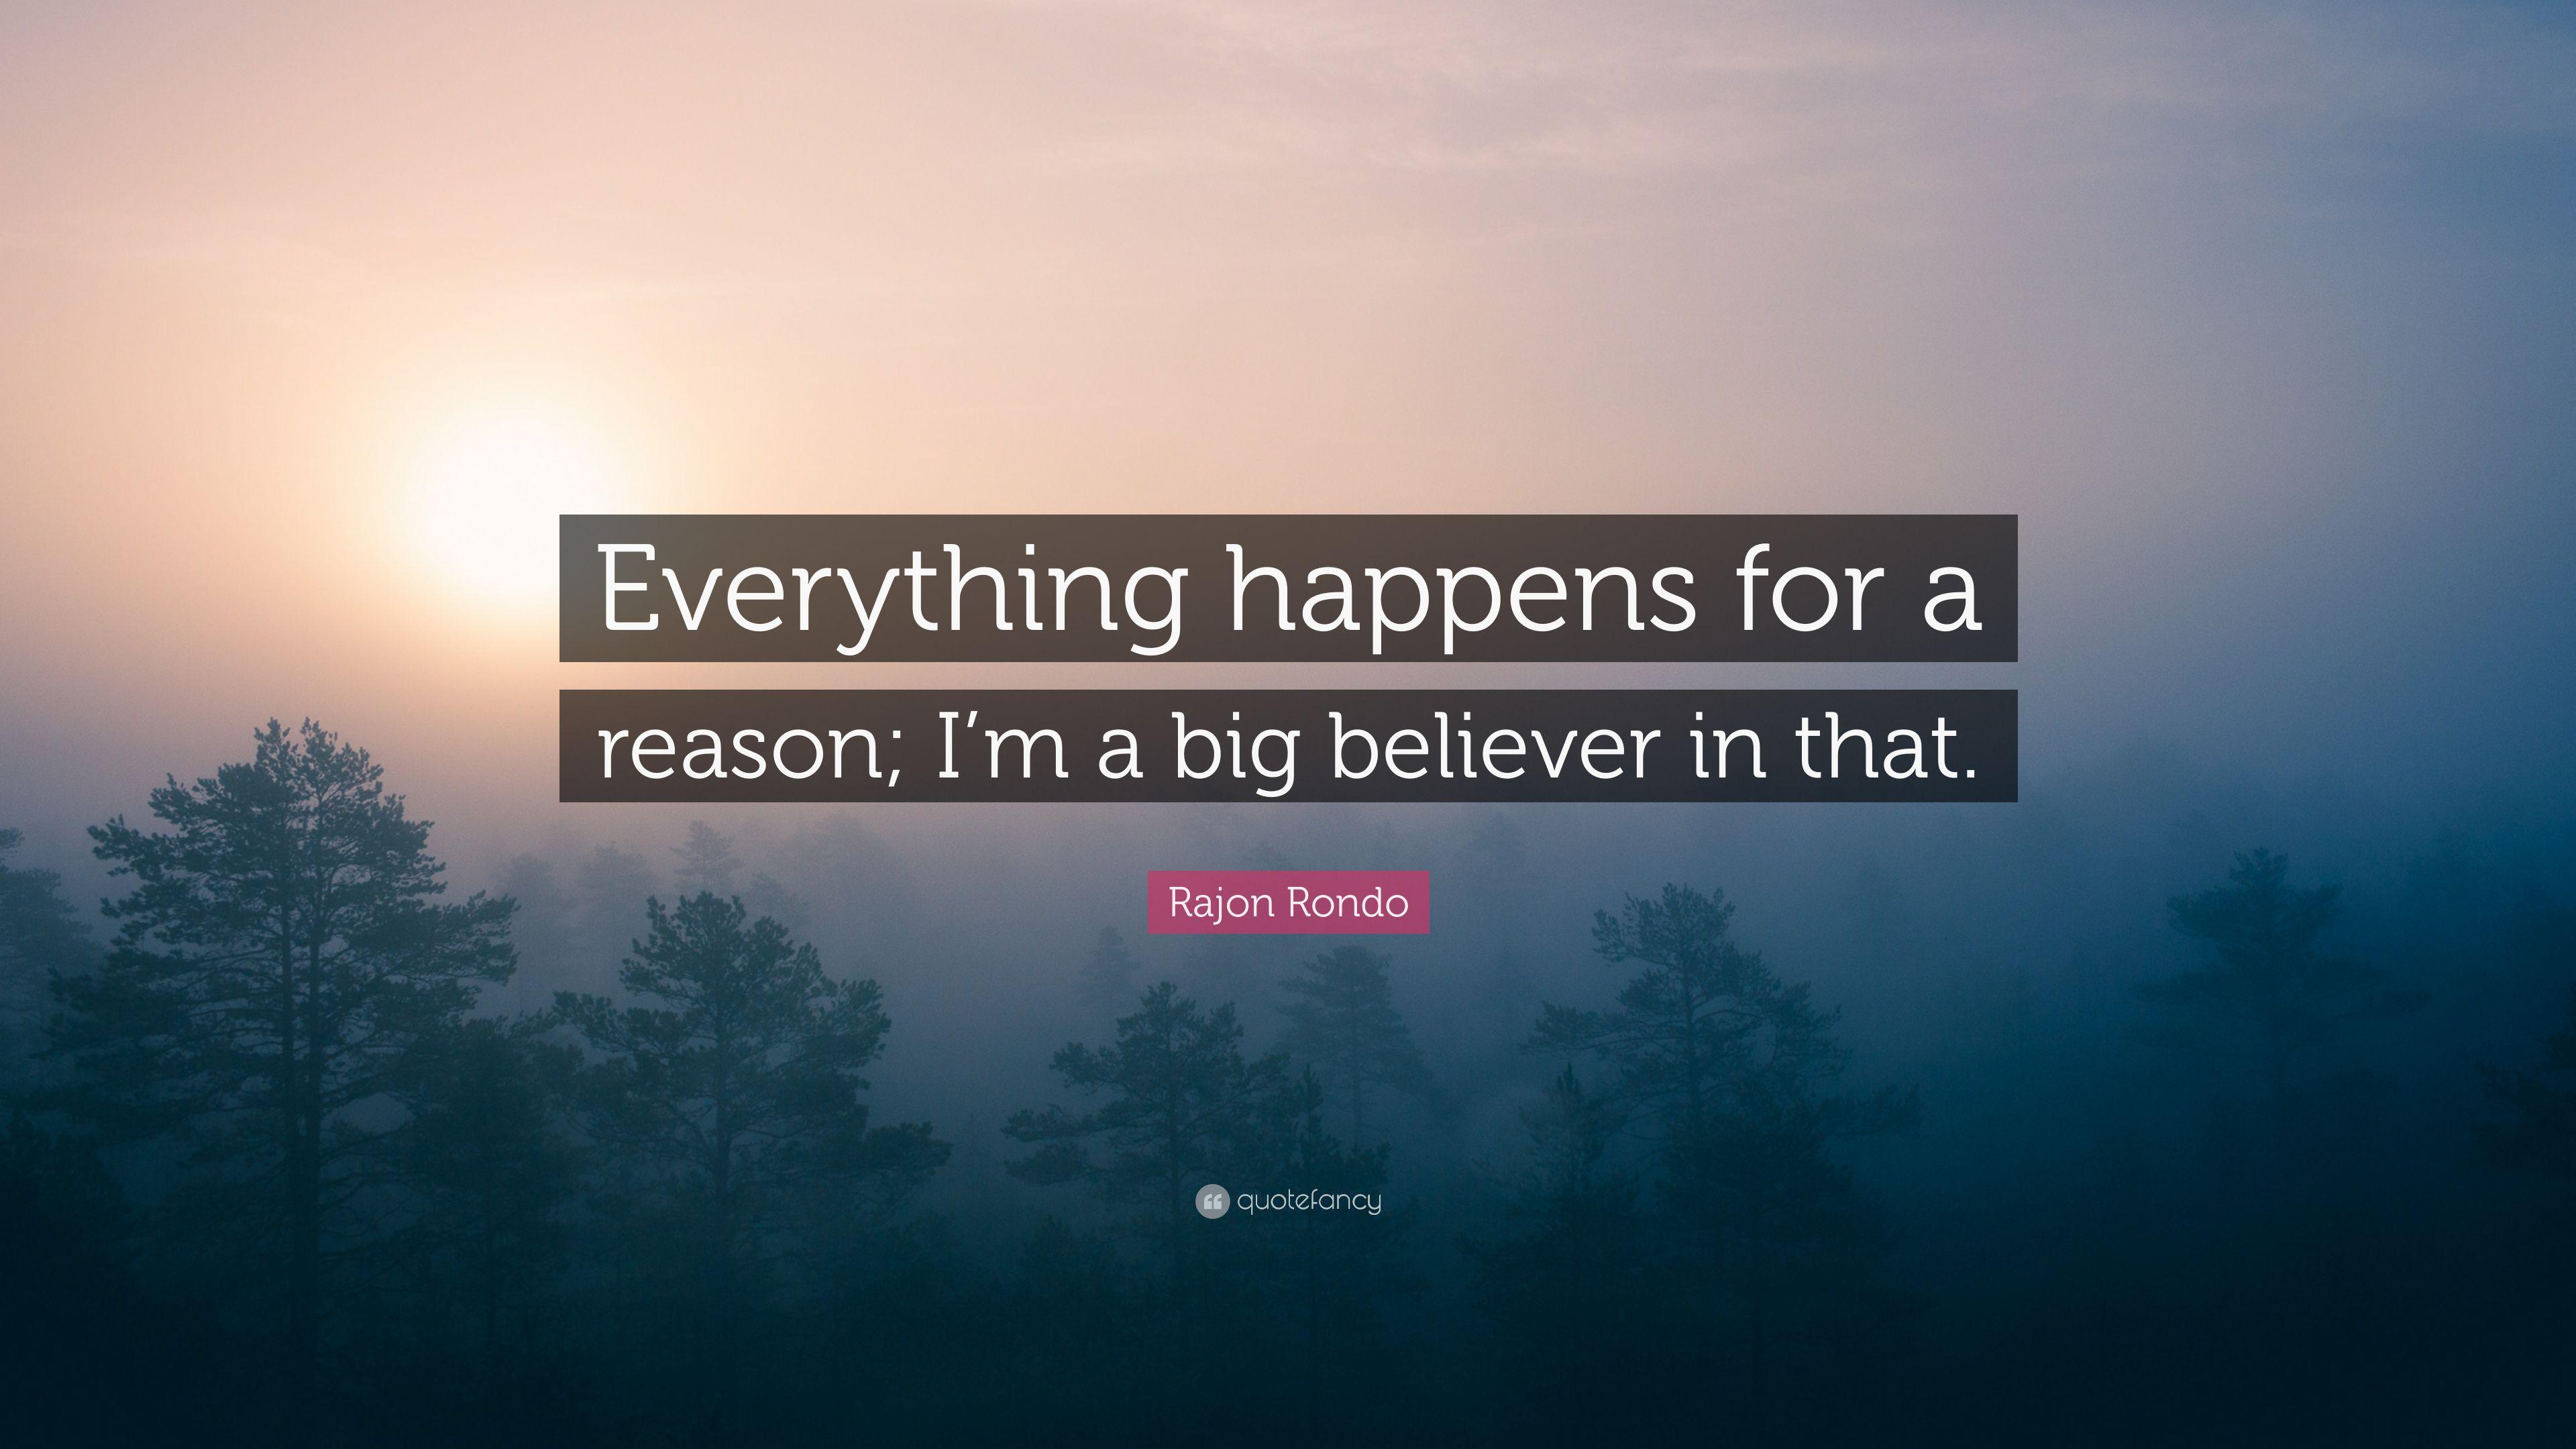 HD wallpaper Everything Happens For A Reason everything happens for a  reason text  Wallpaper Flare